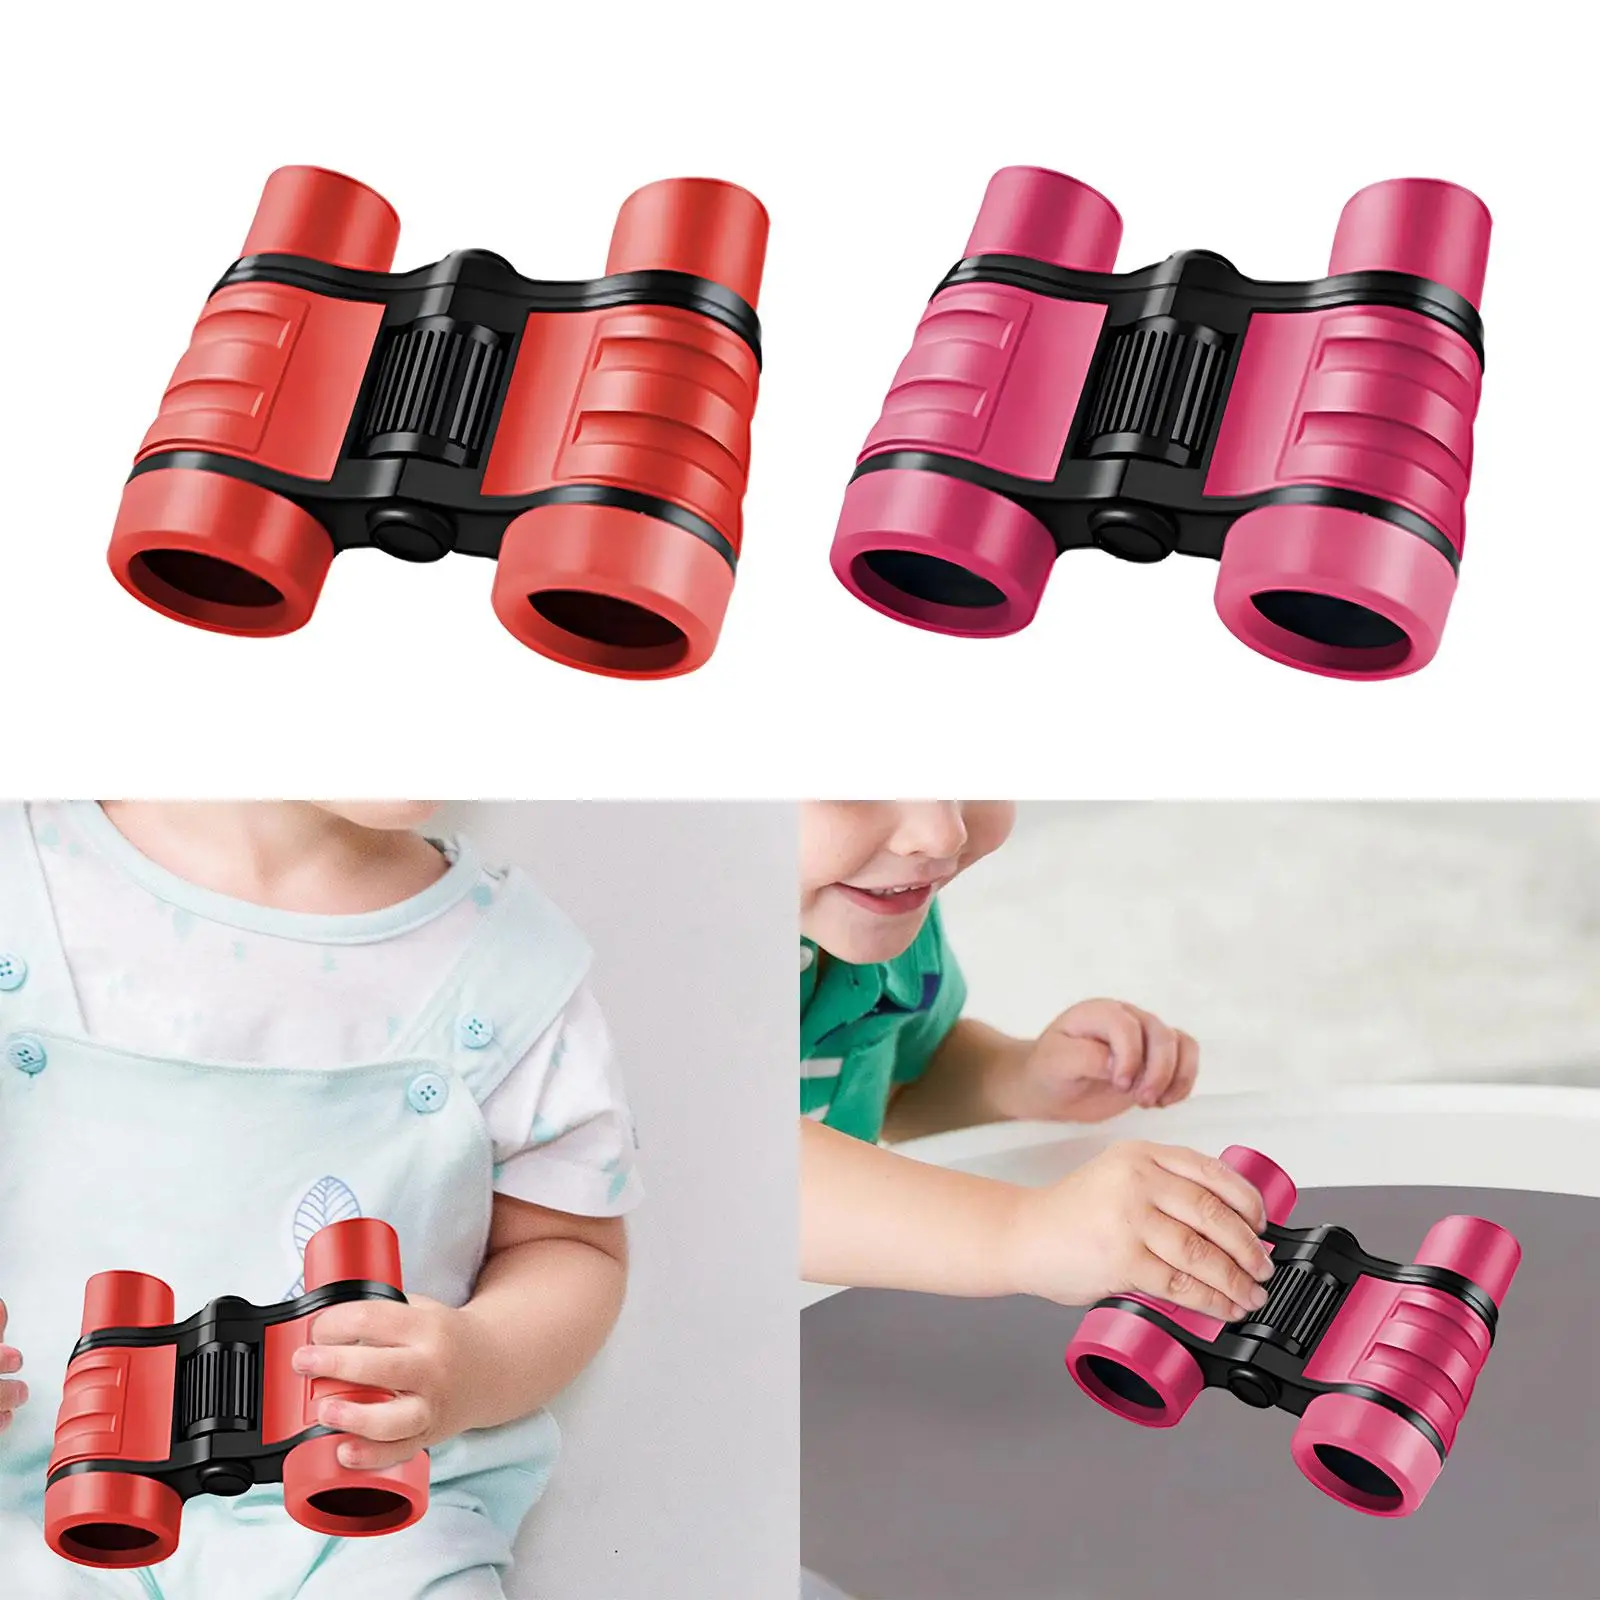 Kids Binoculars Toy 4x30 Bird Watching Children Magnification Toy for Birthday Camping Outdoor Activity Present Party Favors